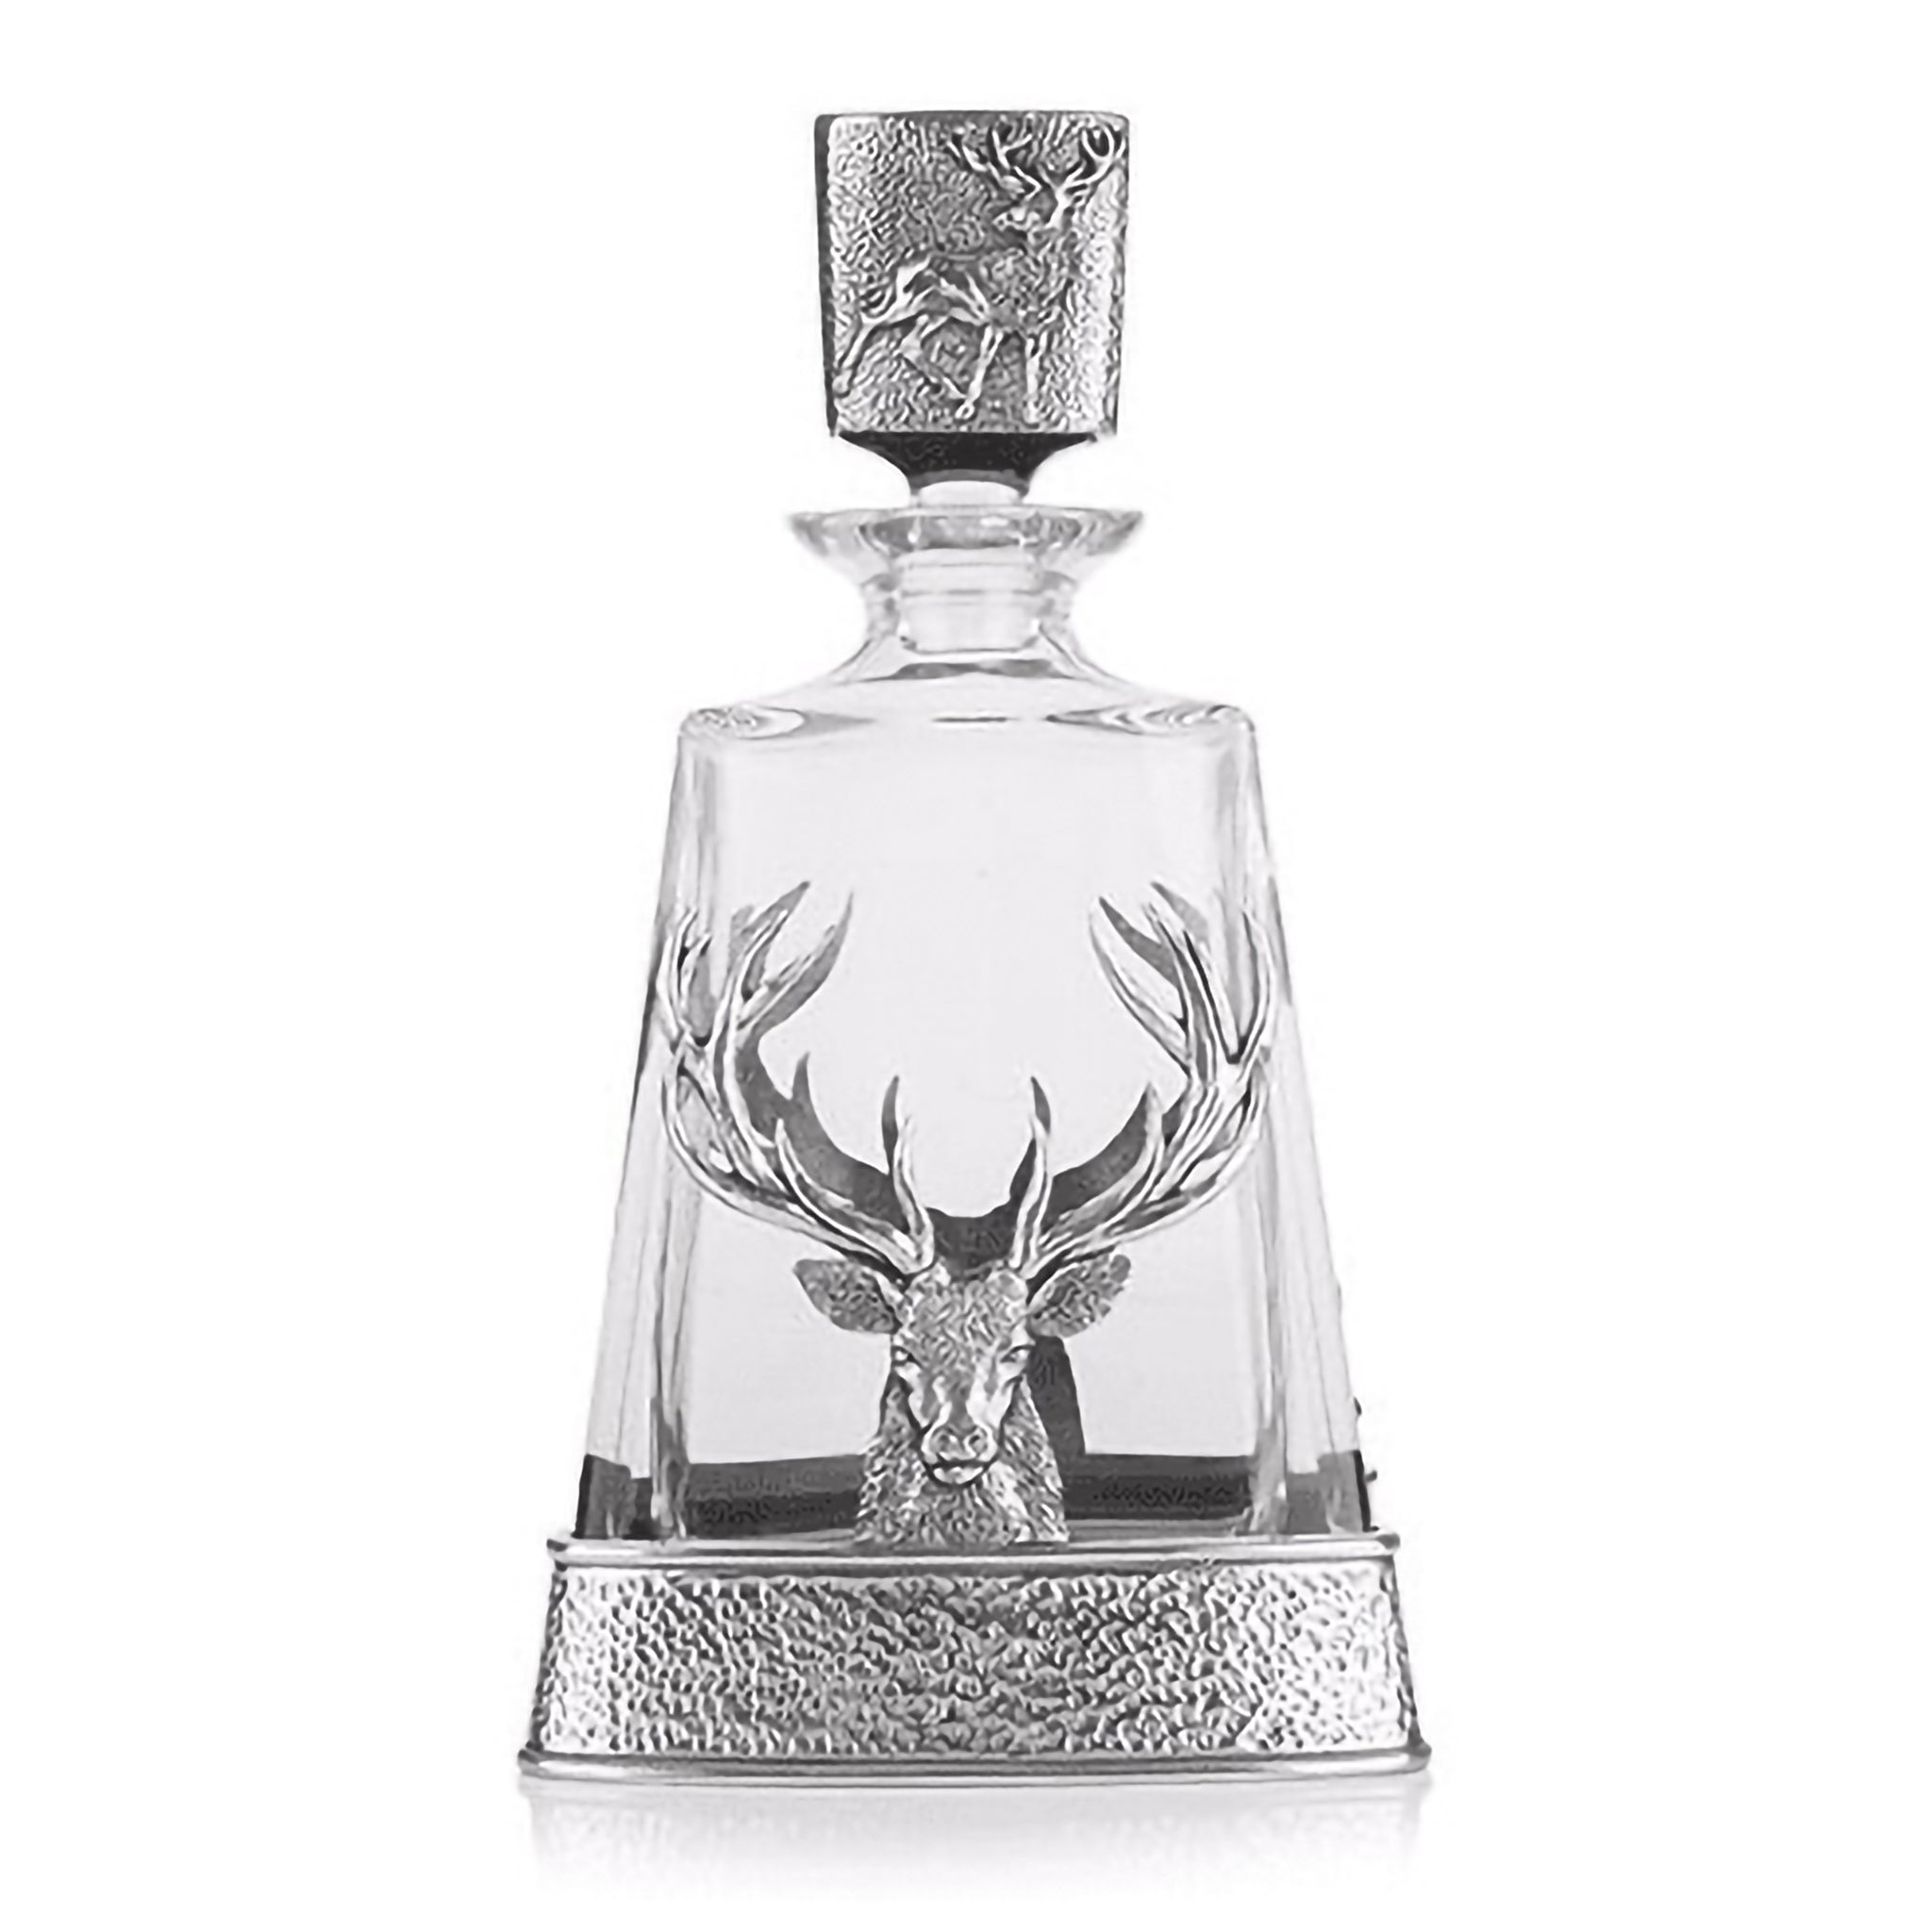 A glass decanter with a pewter base featuring a large stag head and a stopper lid featuring a standing stag